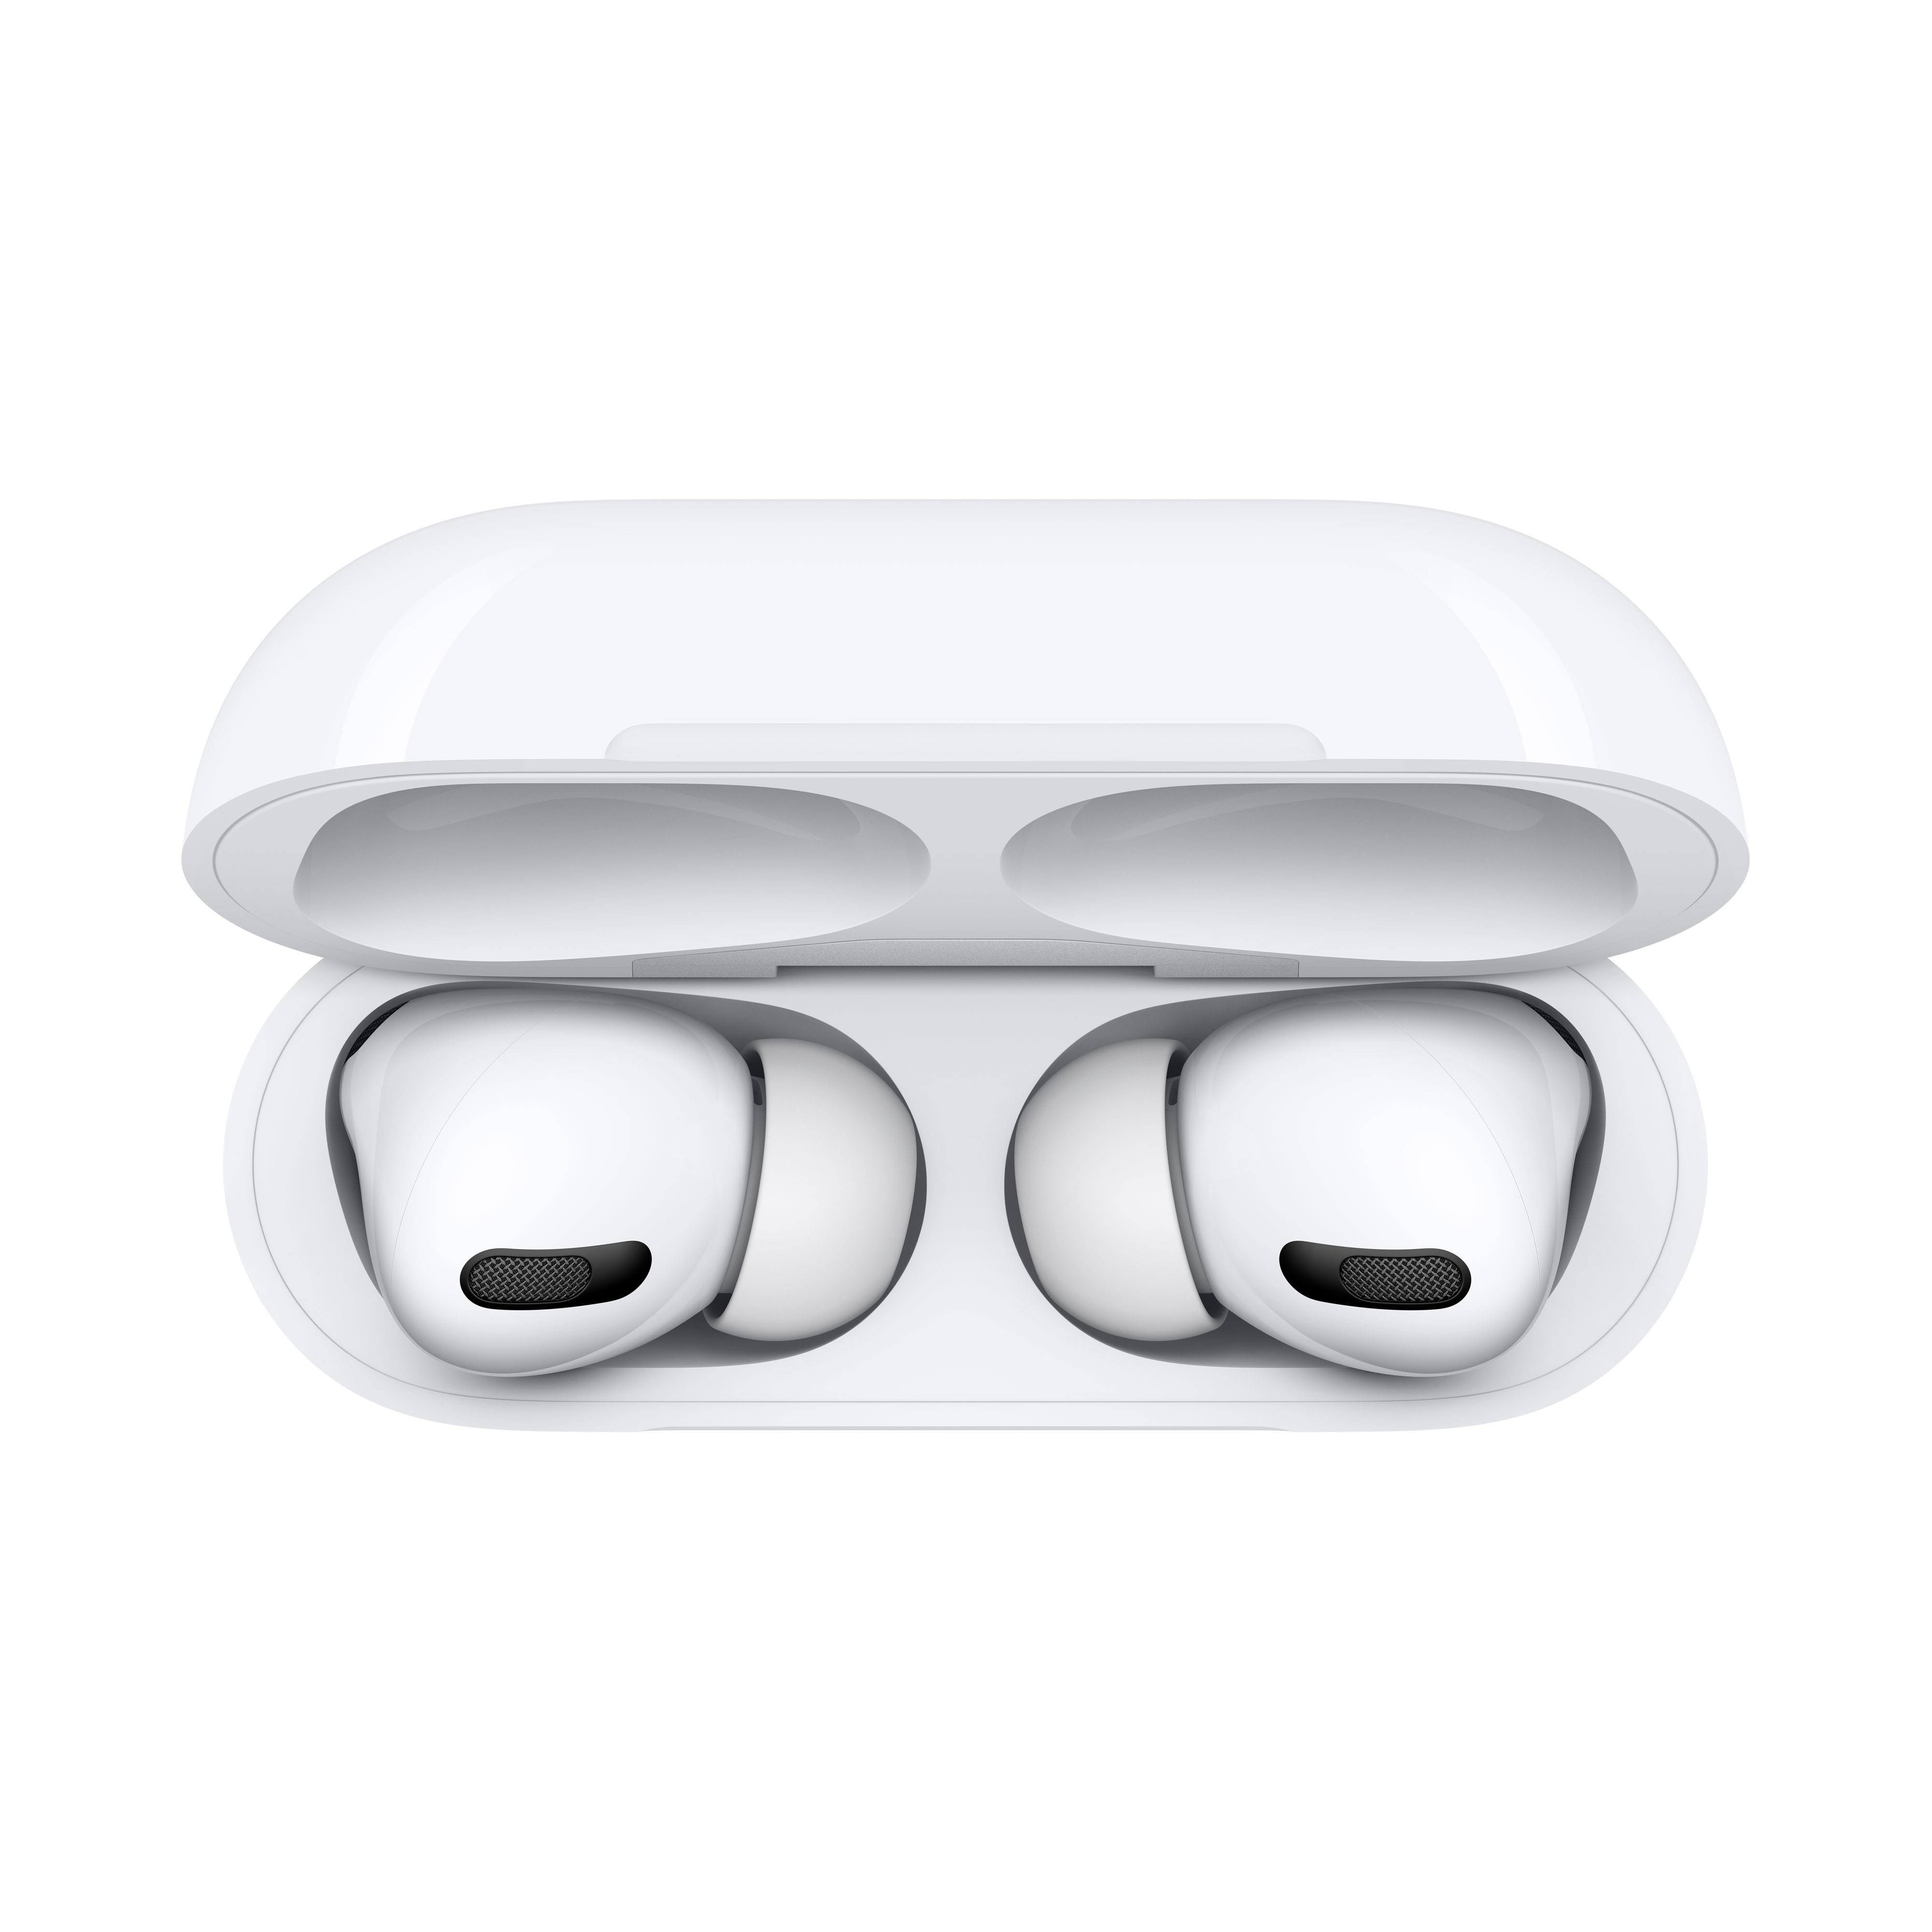 Apple AirPods Pro (1st Generation) - image 4 of 8